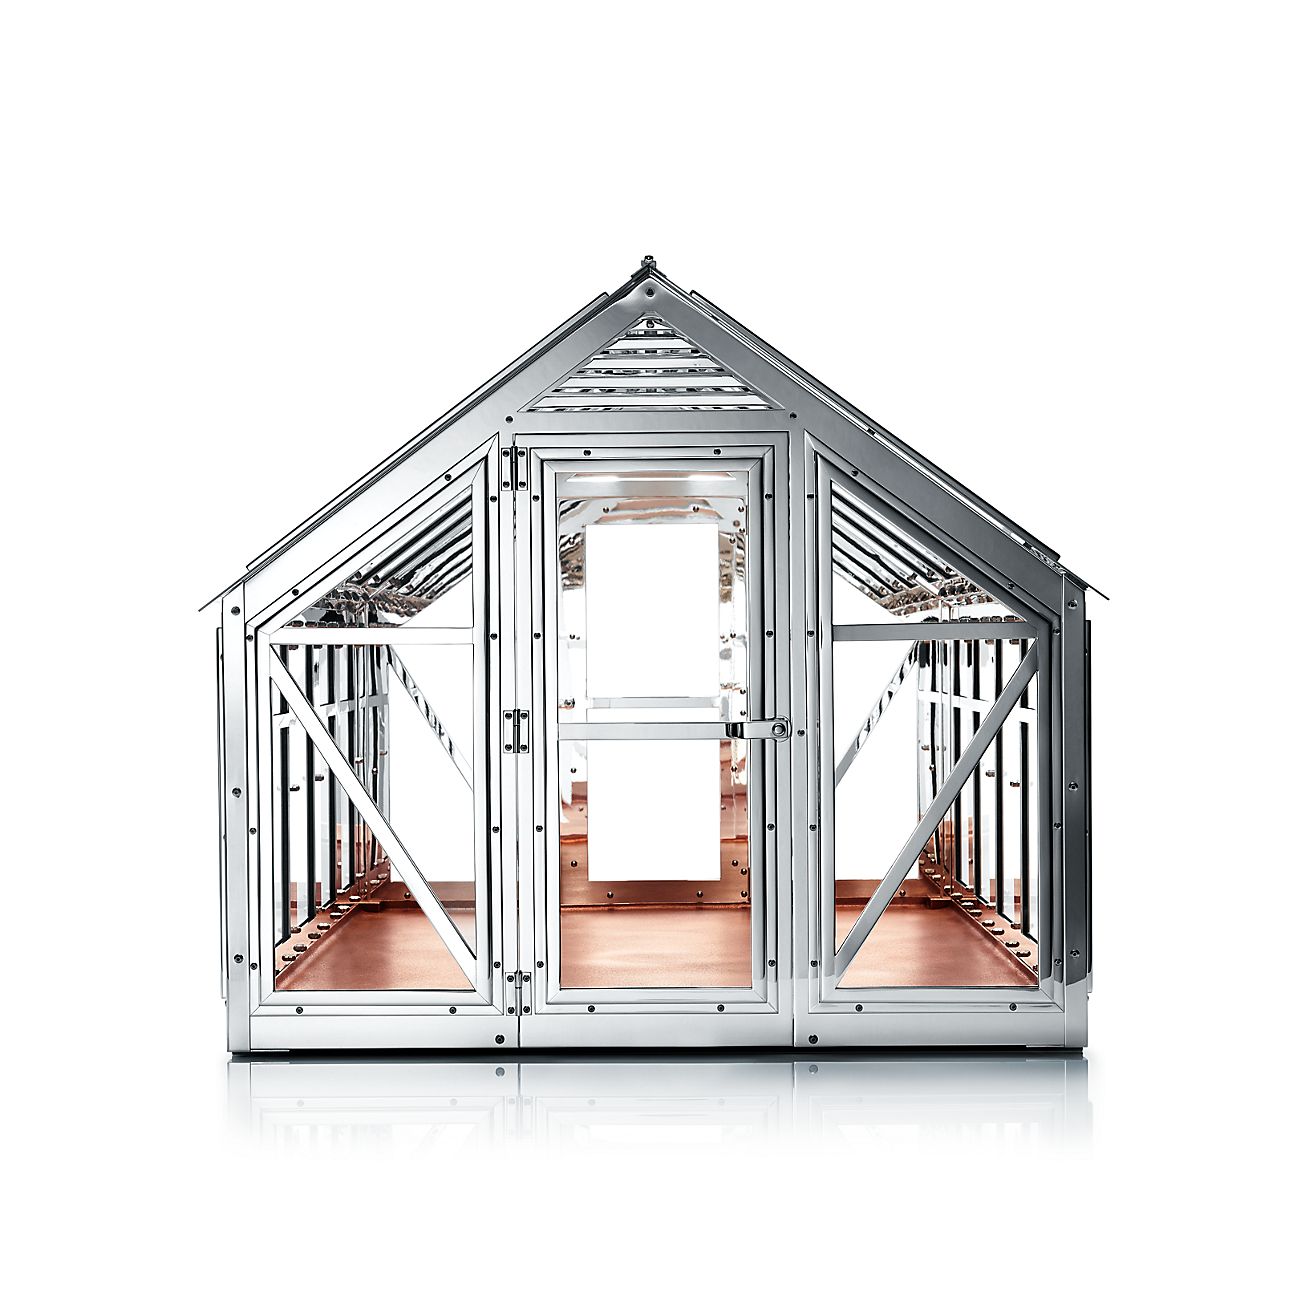 tiffany sterling silver greenhouse